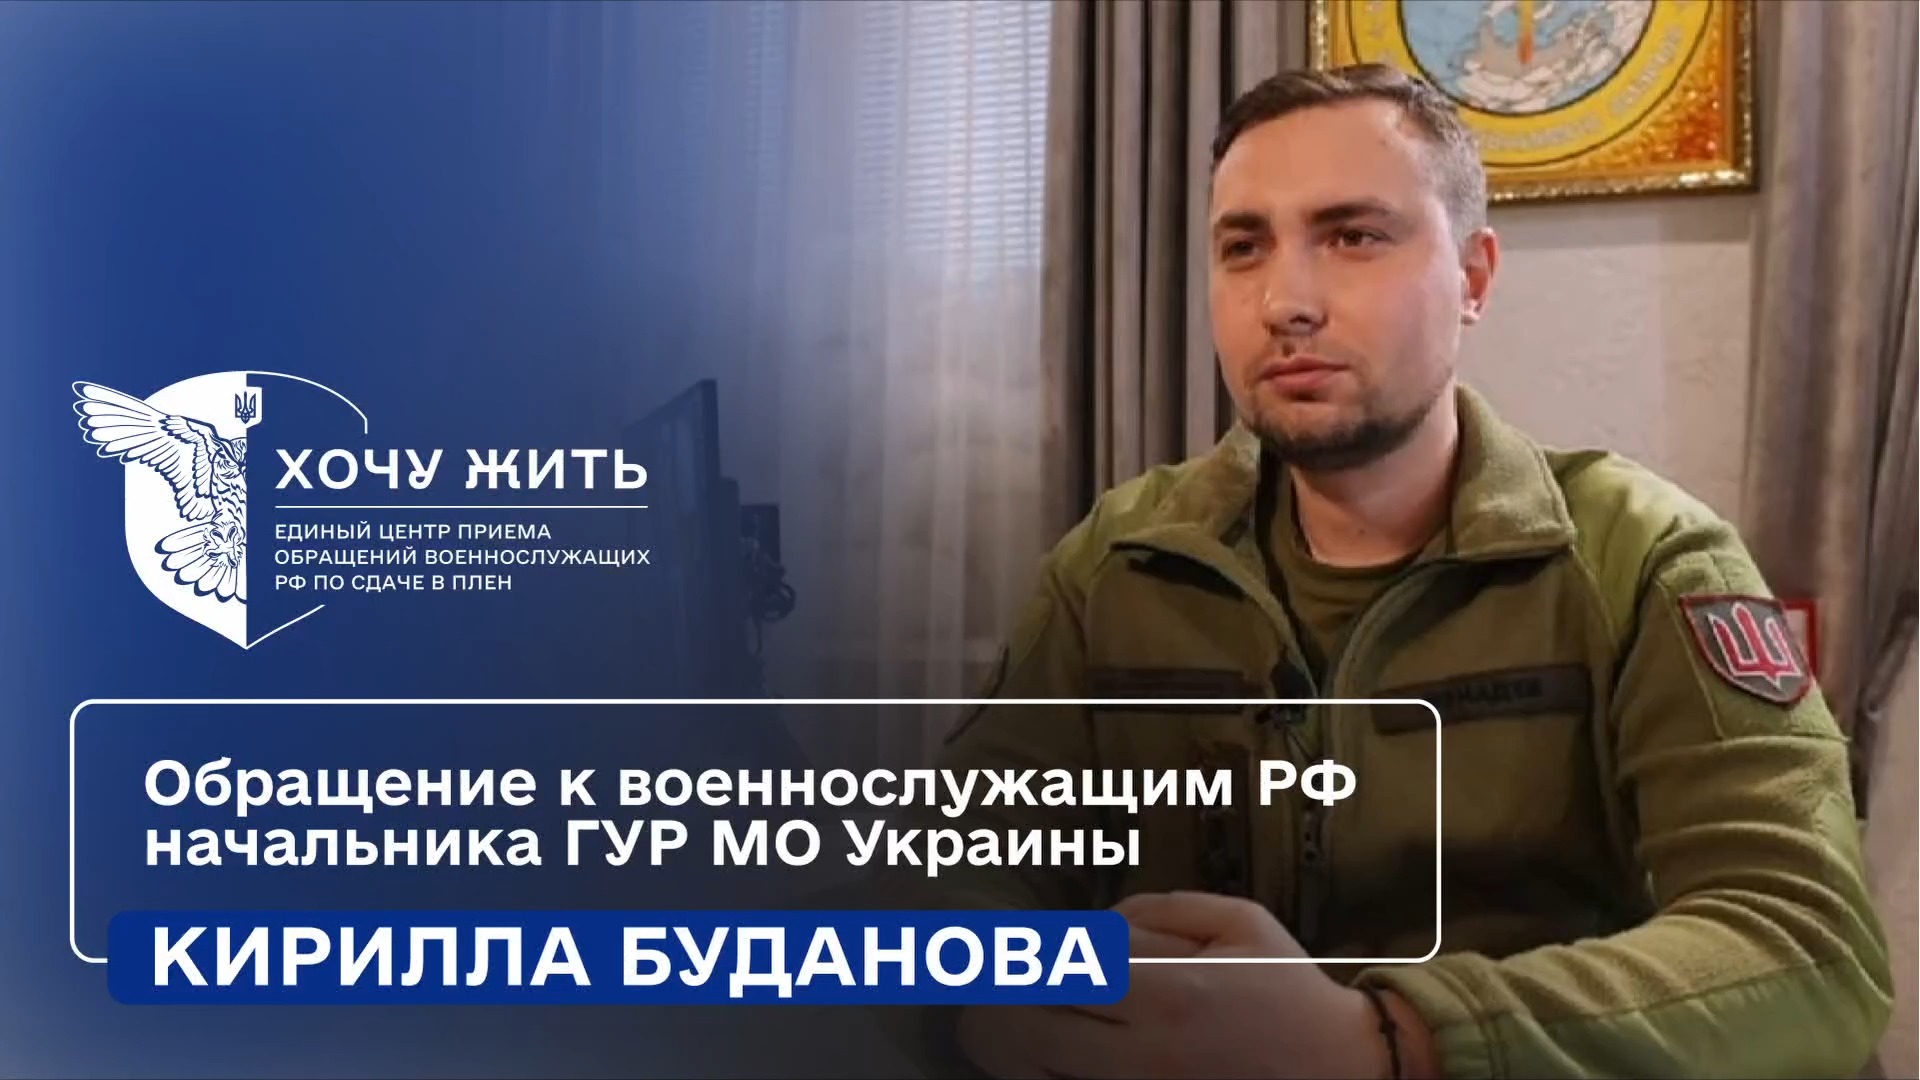 Kyrylo Budanov, Chief of the Defence Intelligence of Ukraine, Addresses to russian Servicemen: &quot;You Are Able to End War Right Now &ndash; It Is Going to Get even Worse&quot;